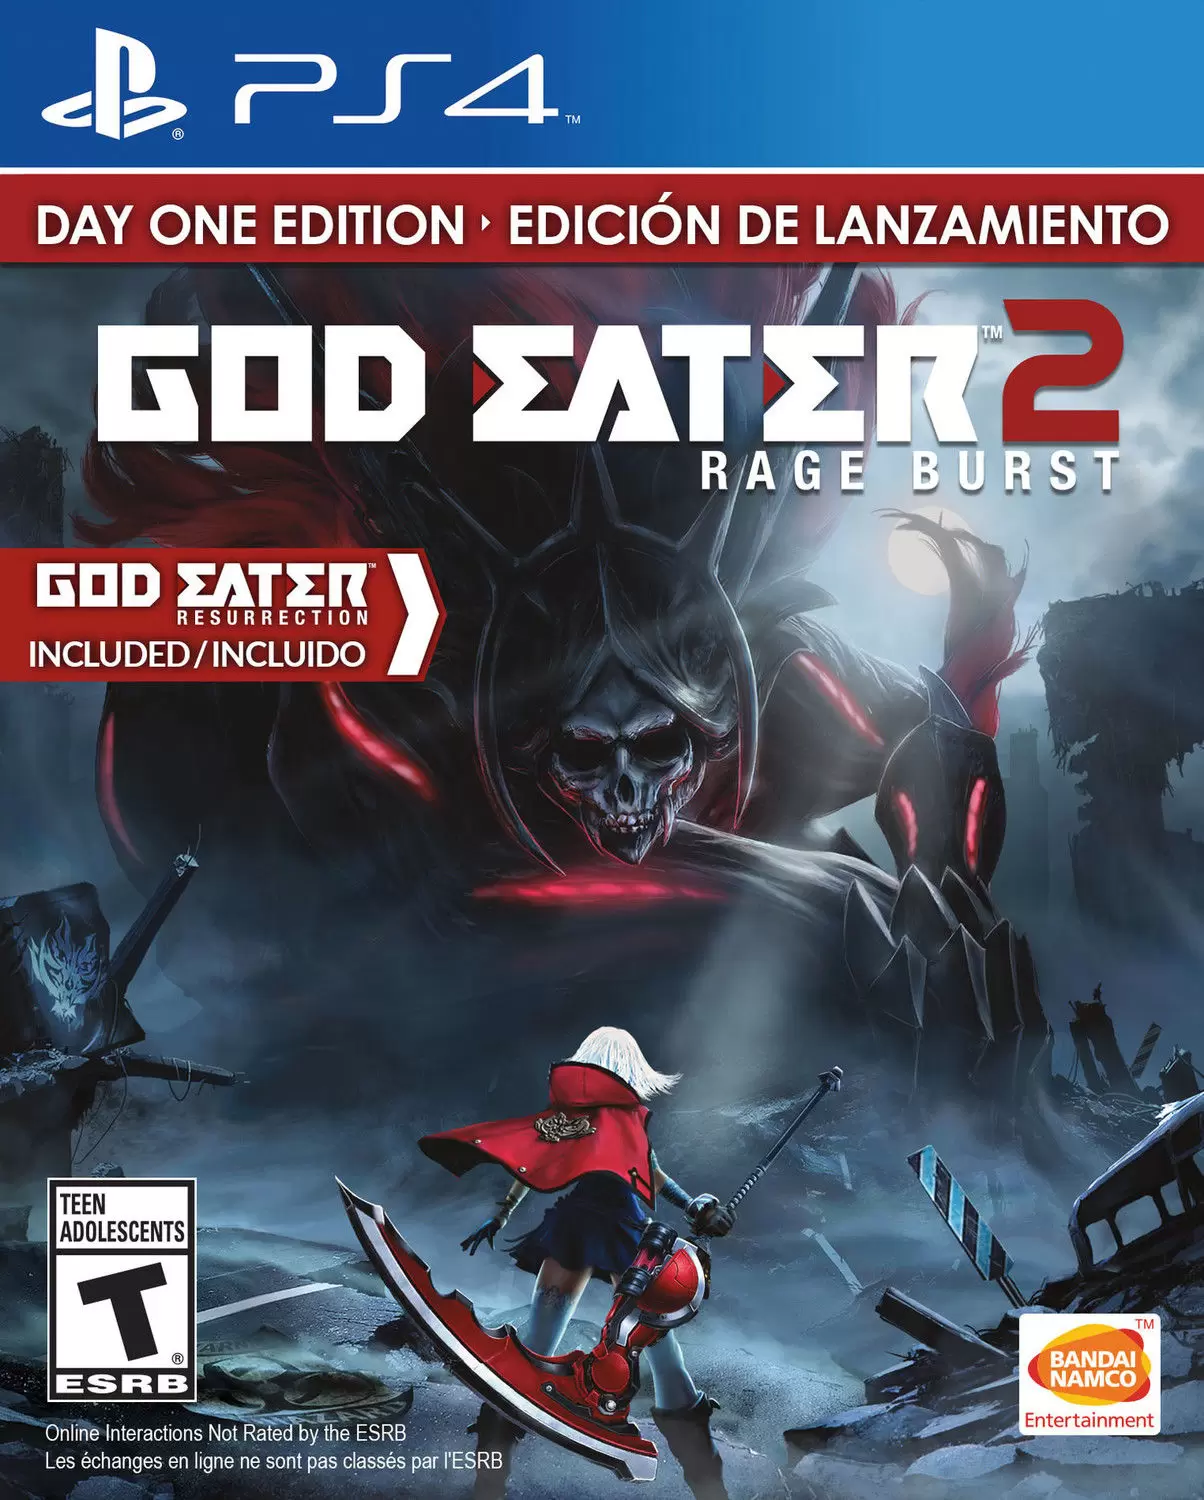 PS4 Games - God Eater 2 Rage Burst Day One Edition